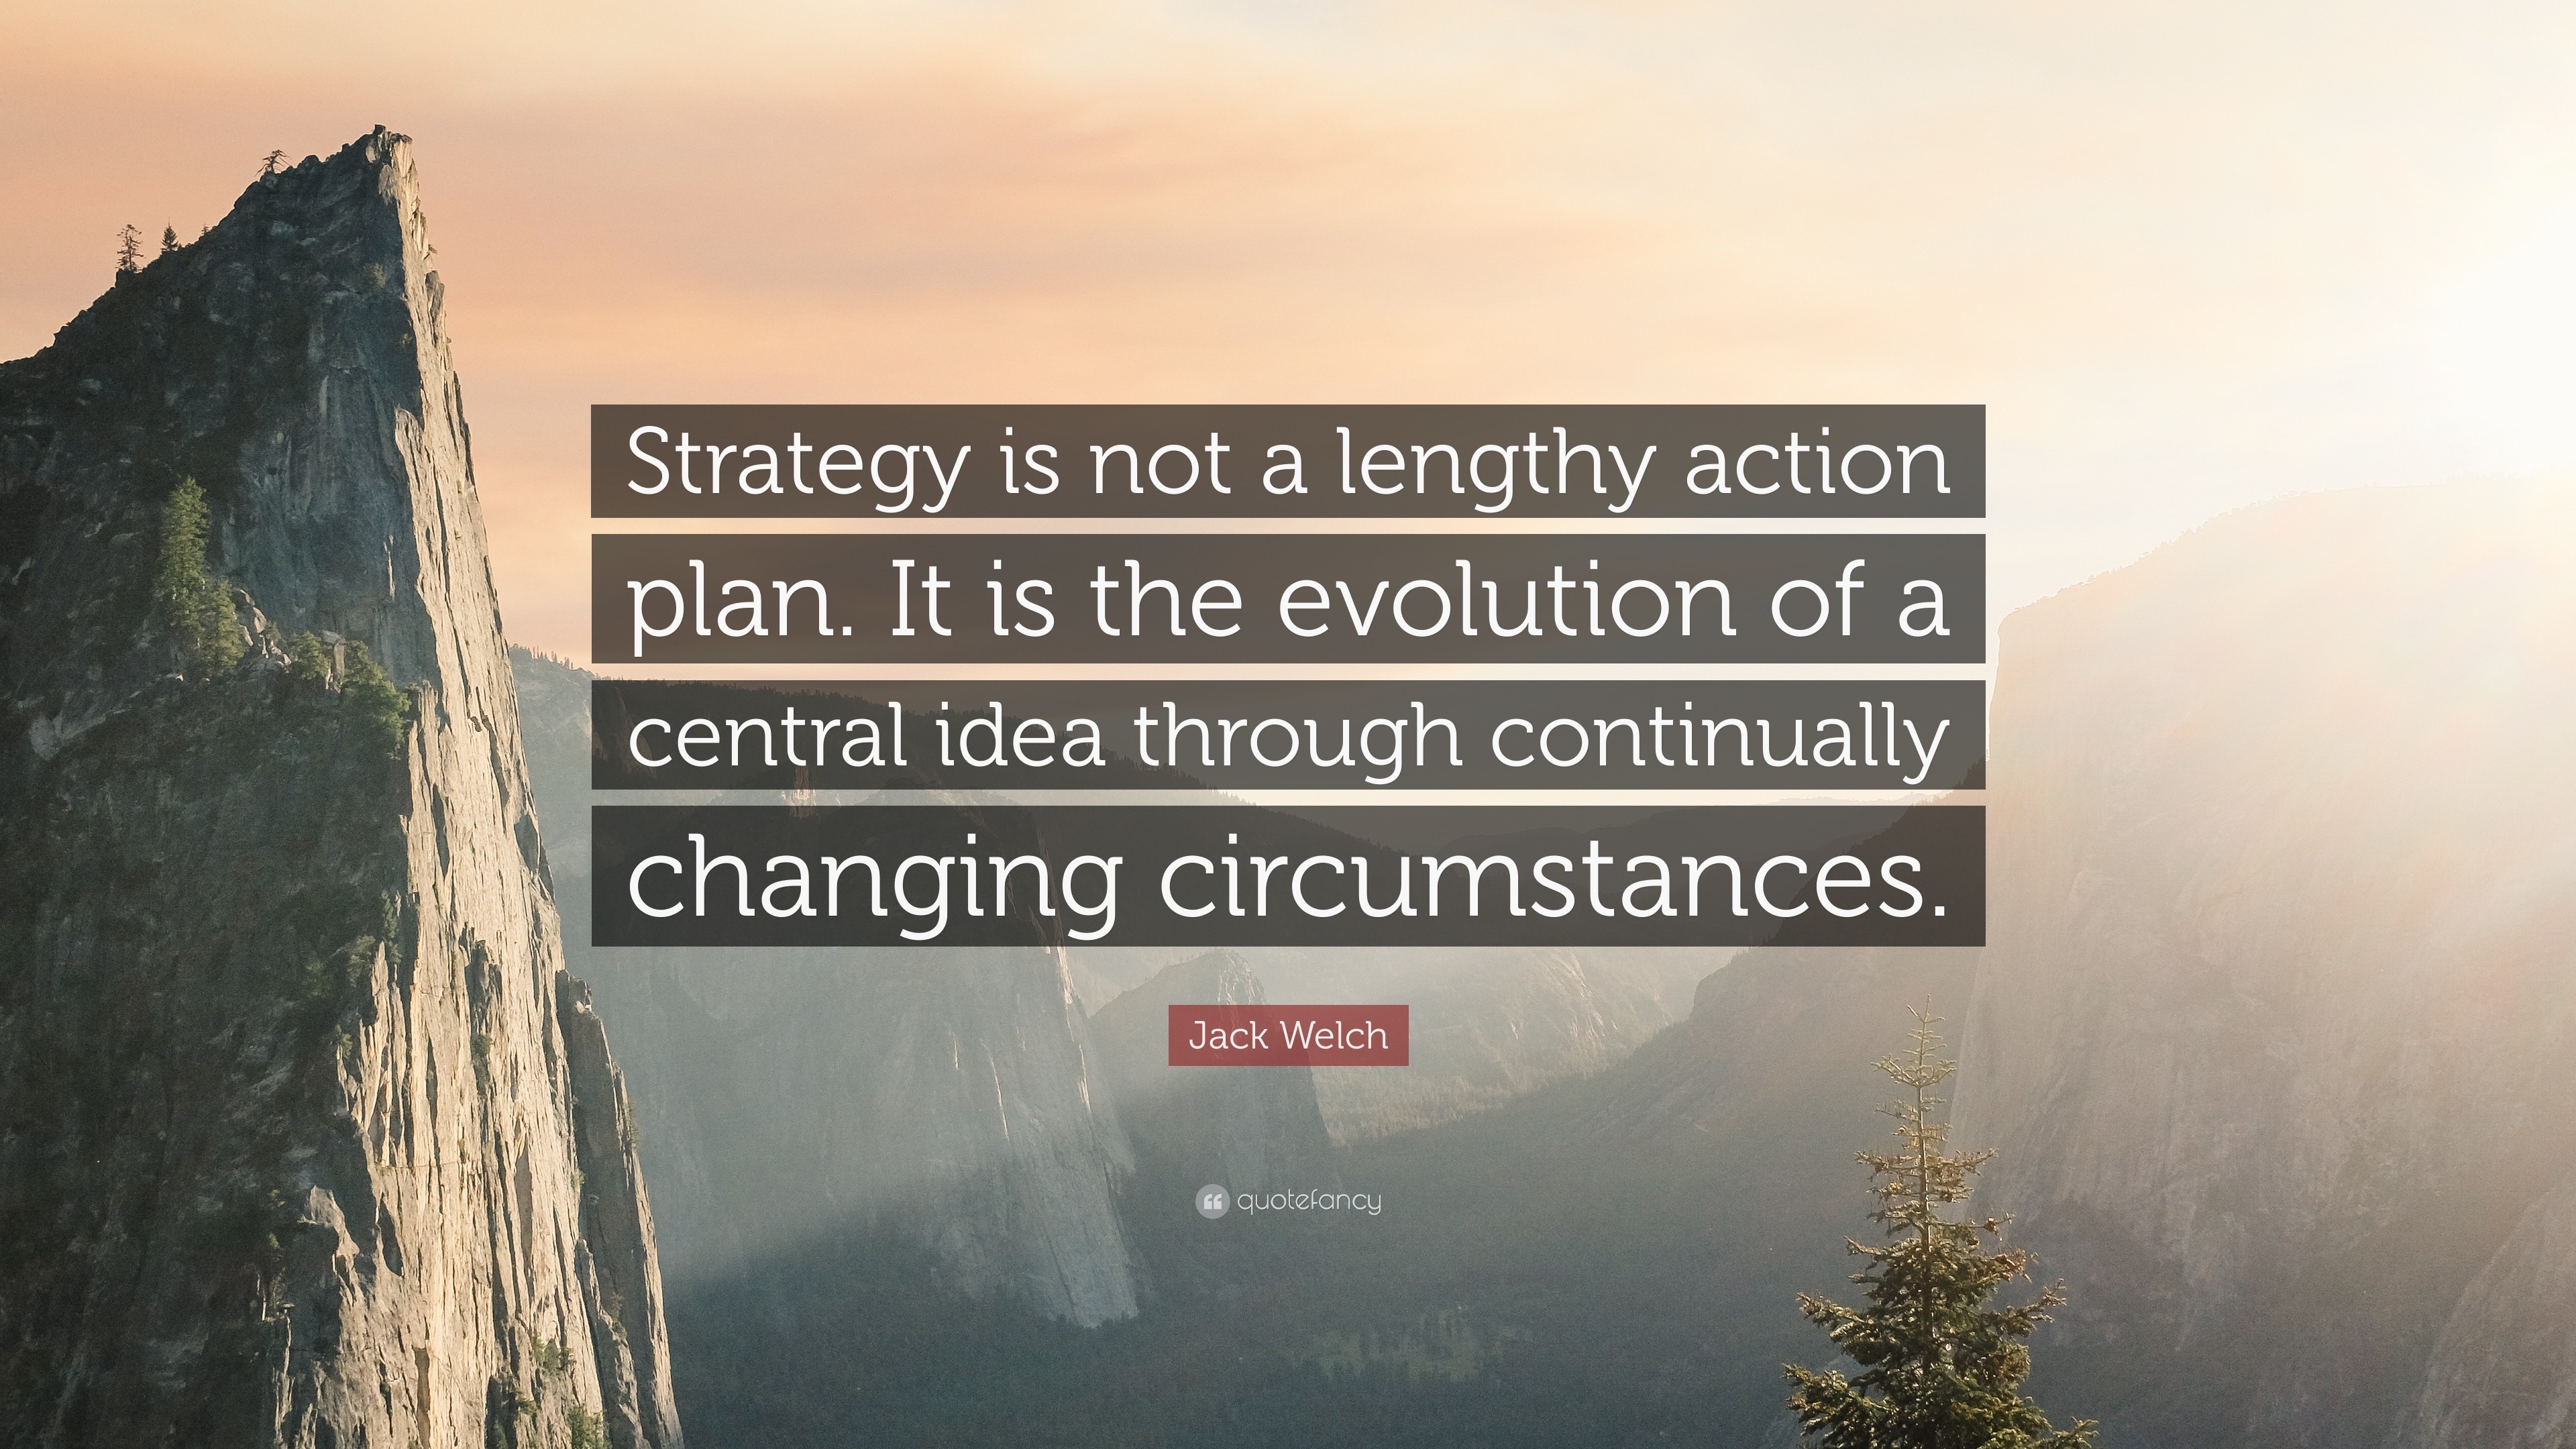 Jack Welch Quote: “Strategy is not a lengthy action plan. It is the